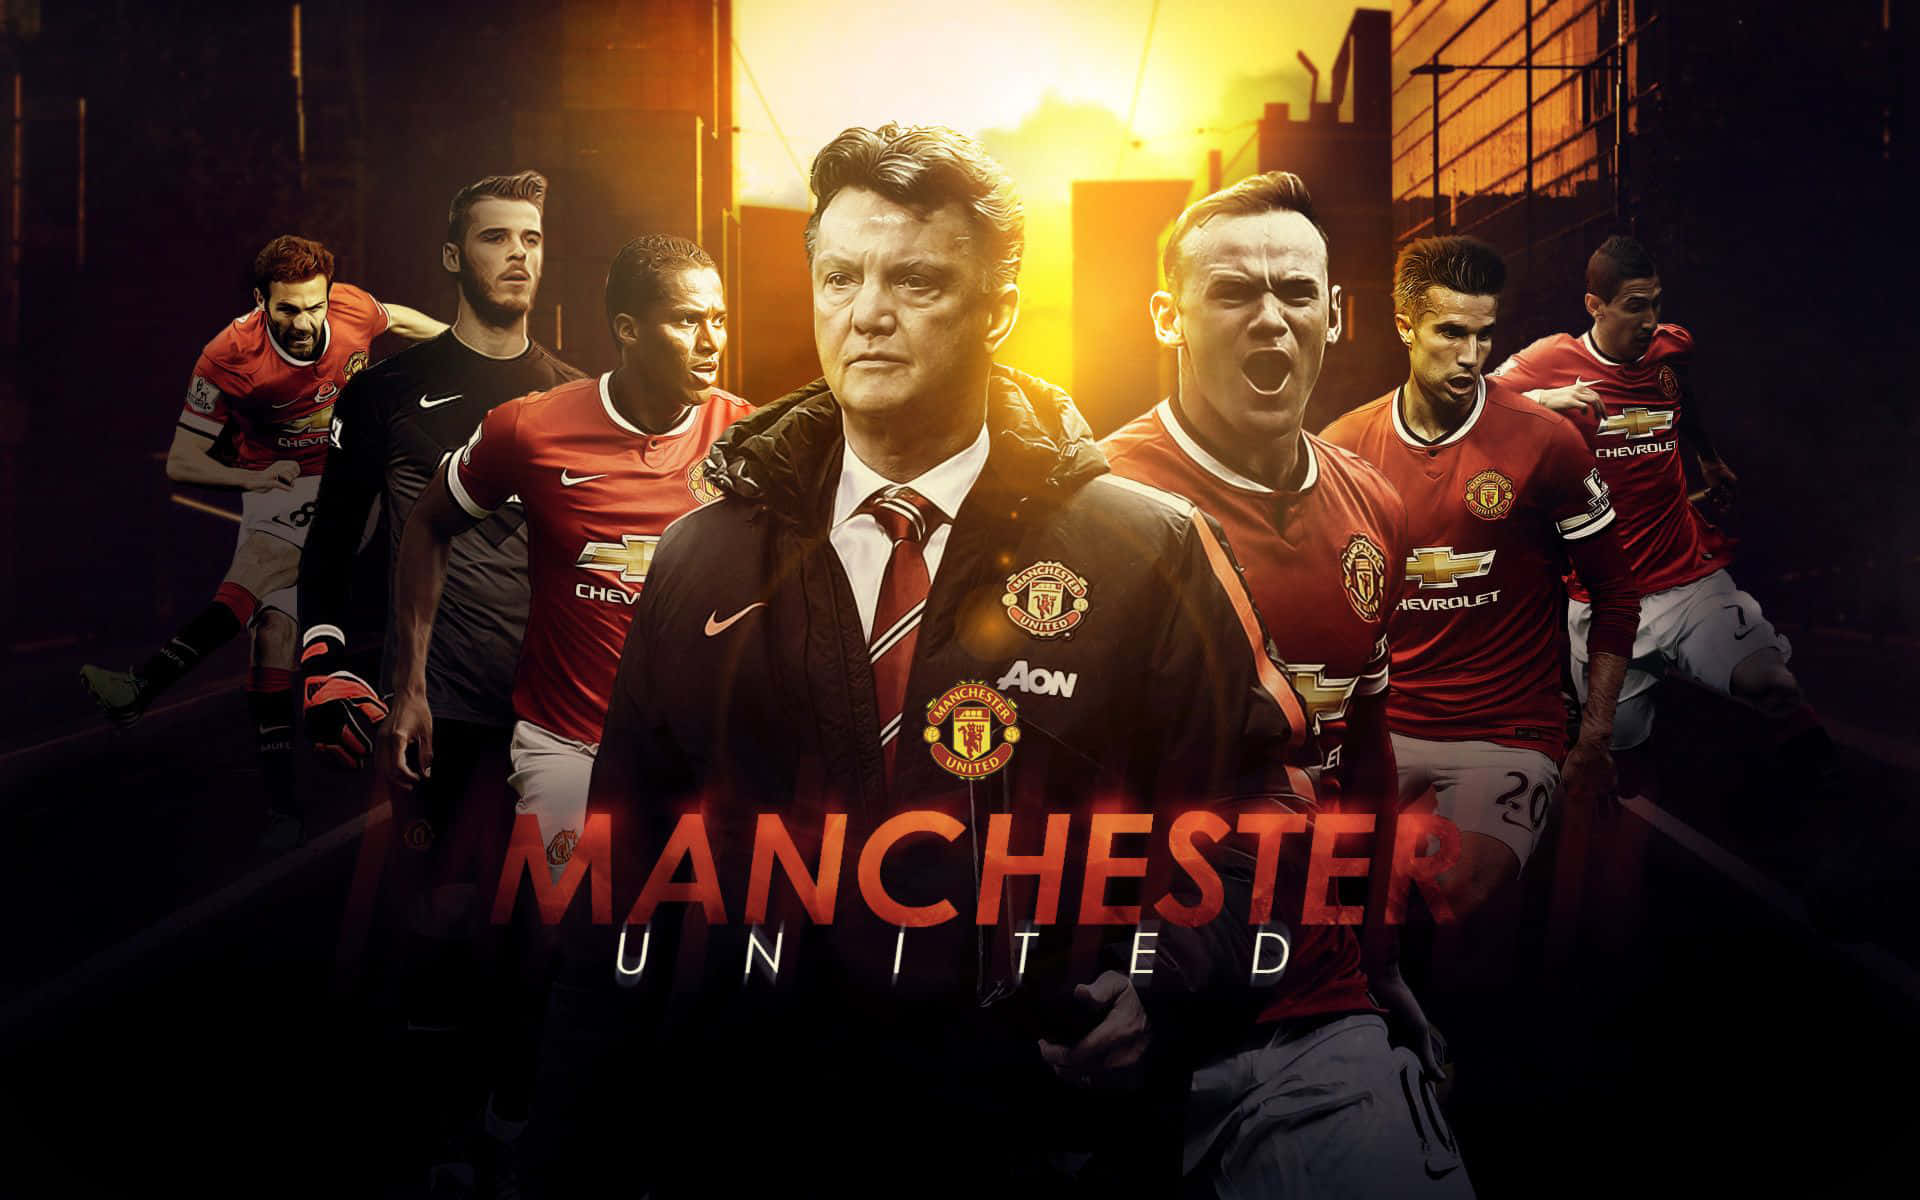 Manchester United Team united as one Wallpaper